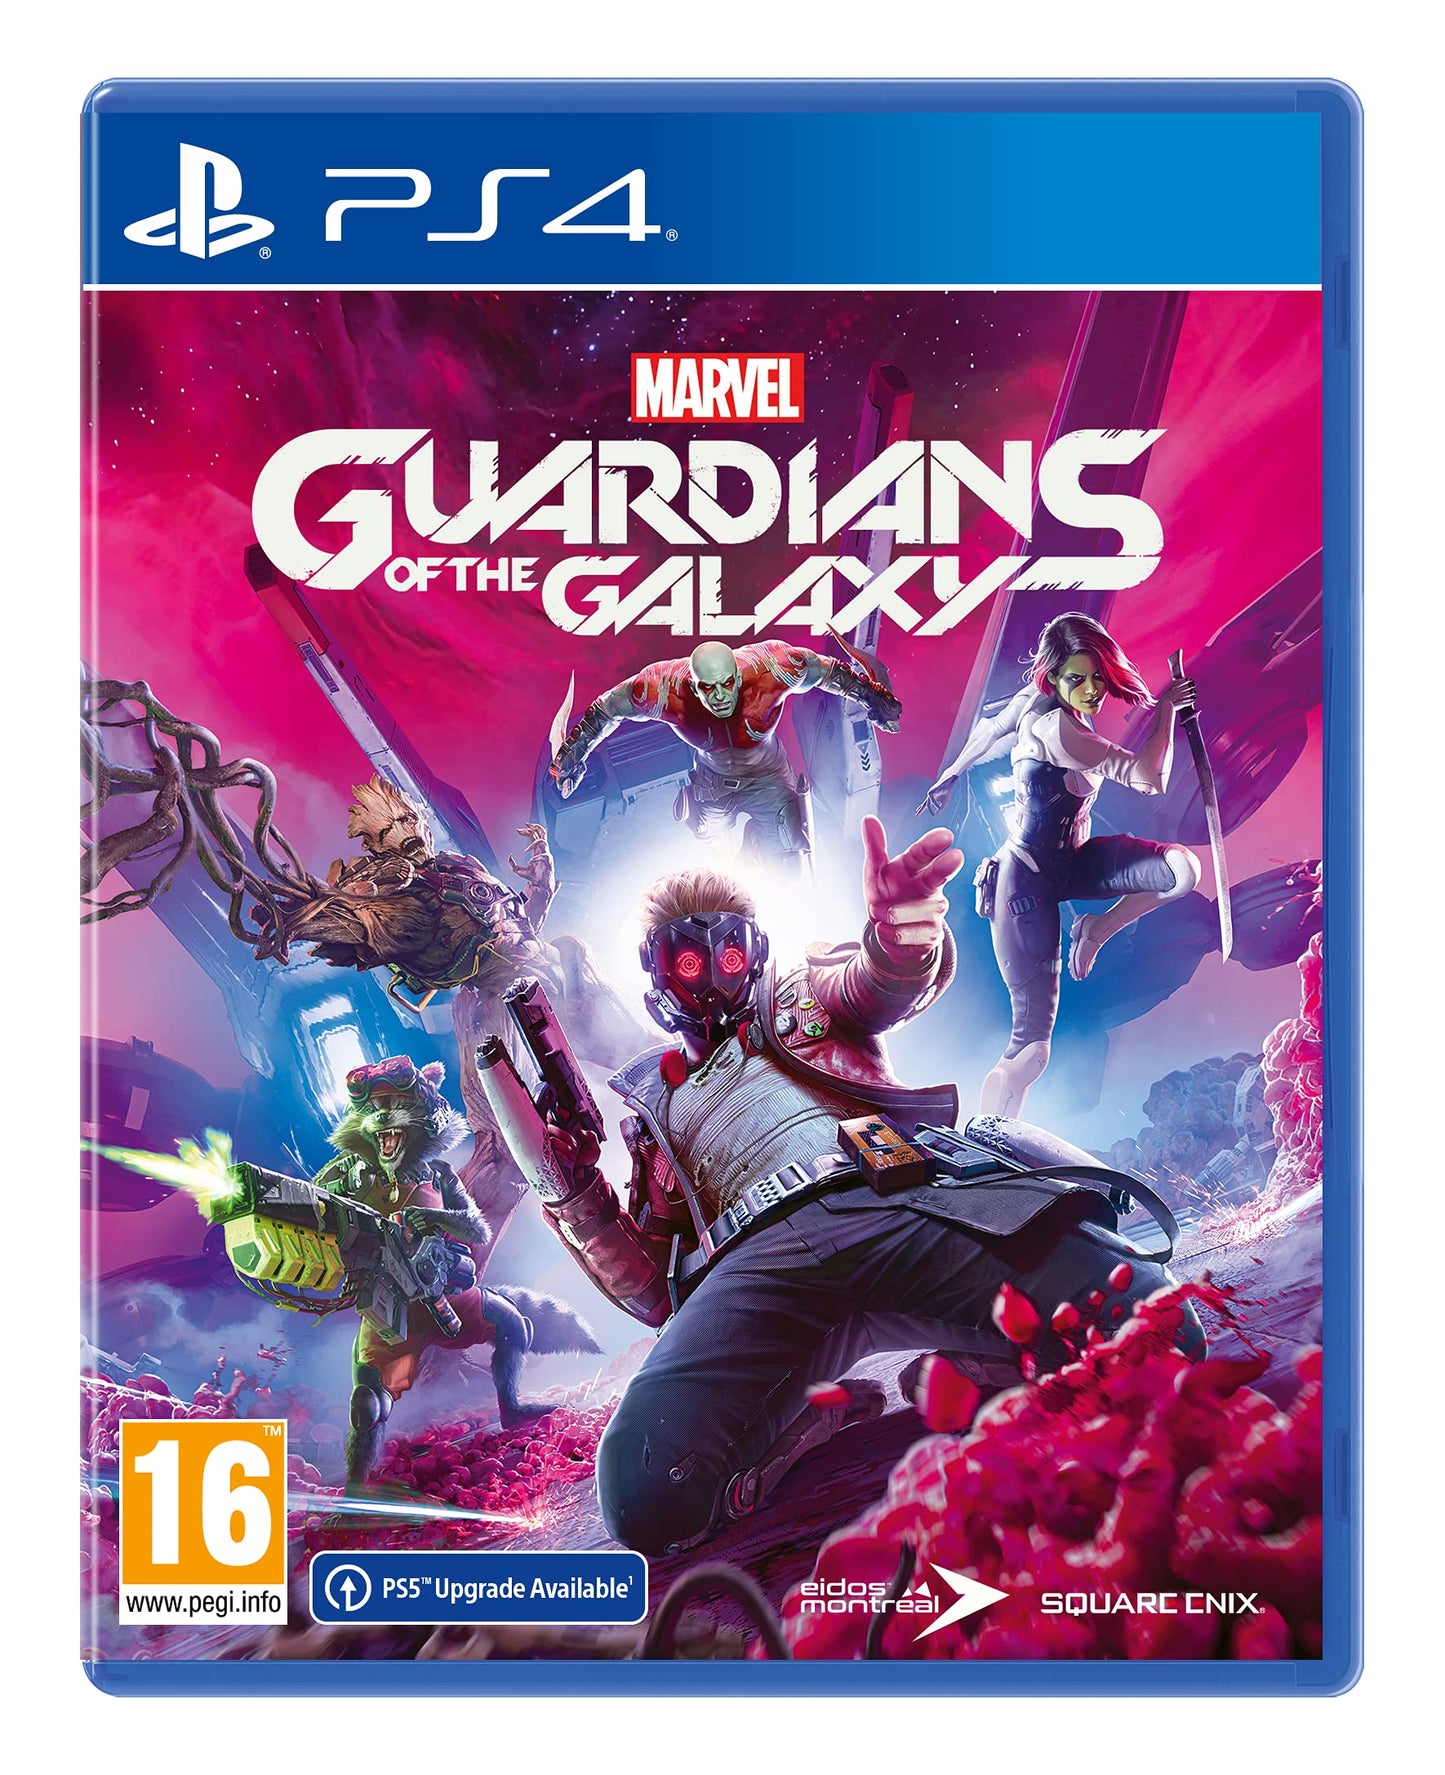 MARVELS GUARDIANS OF THE GALAXY PS4 GAME